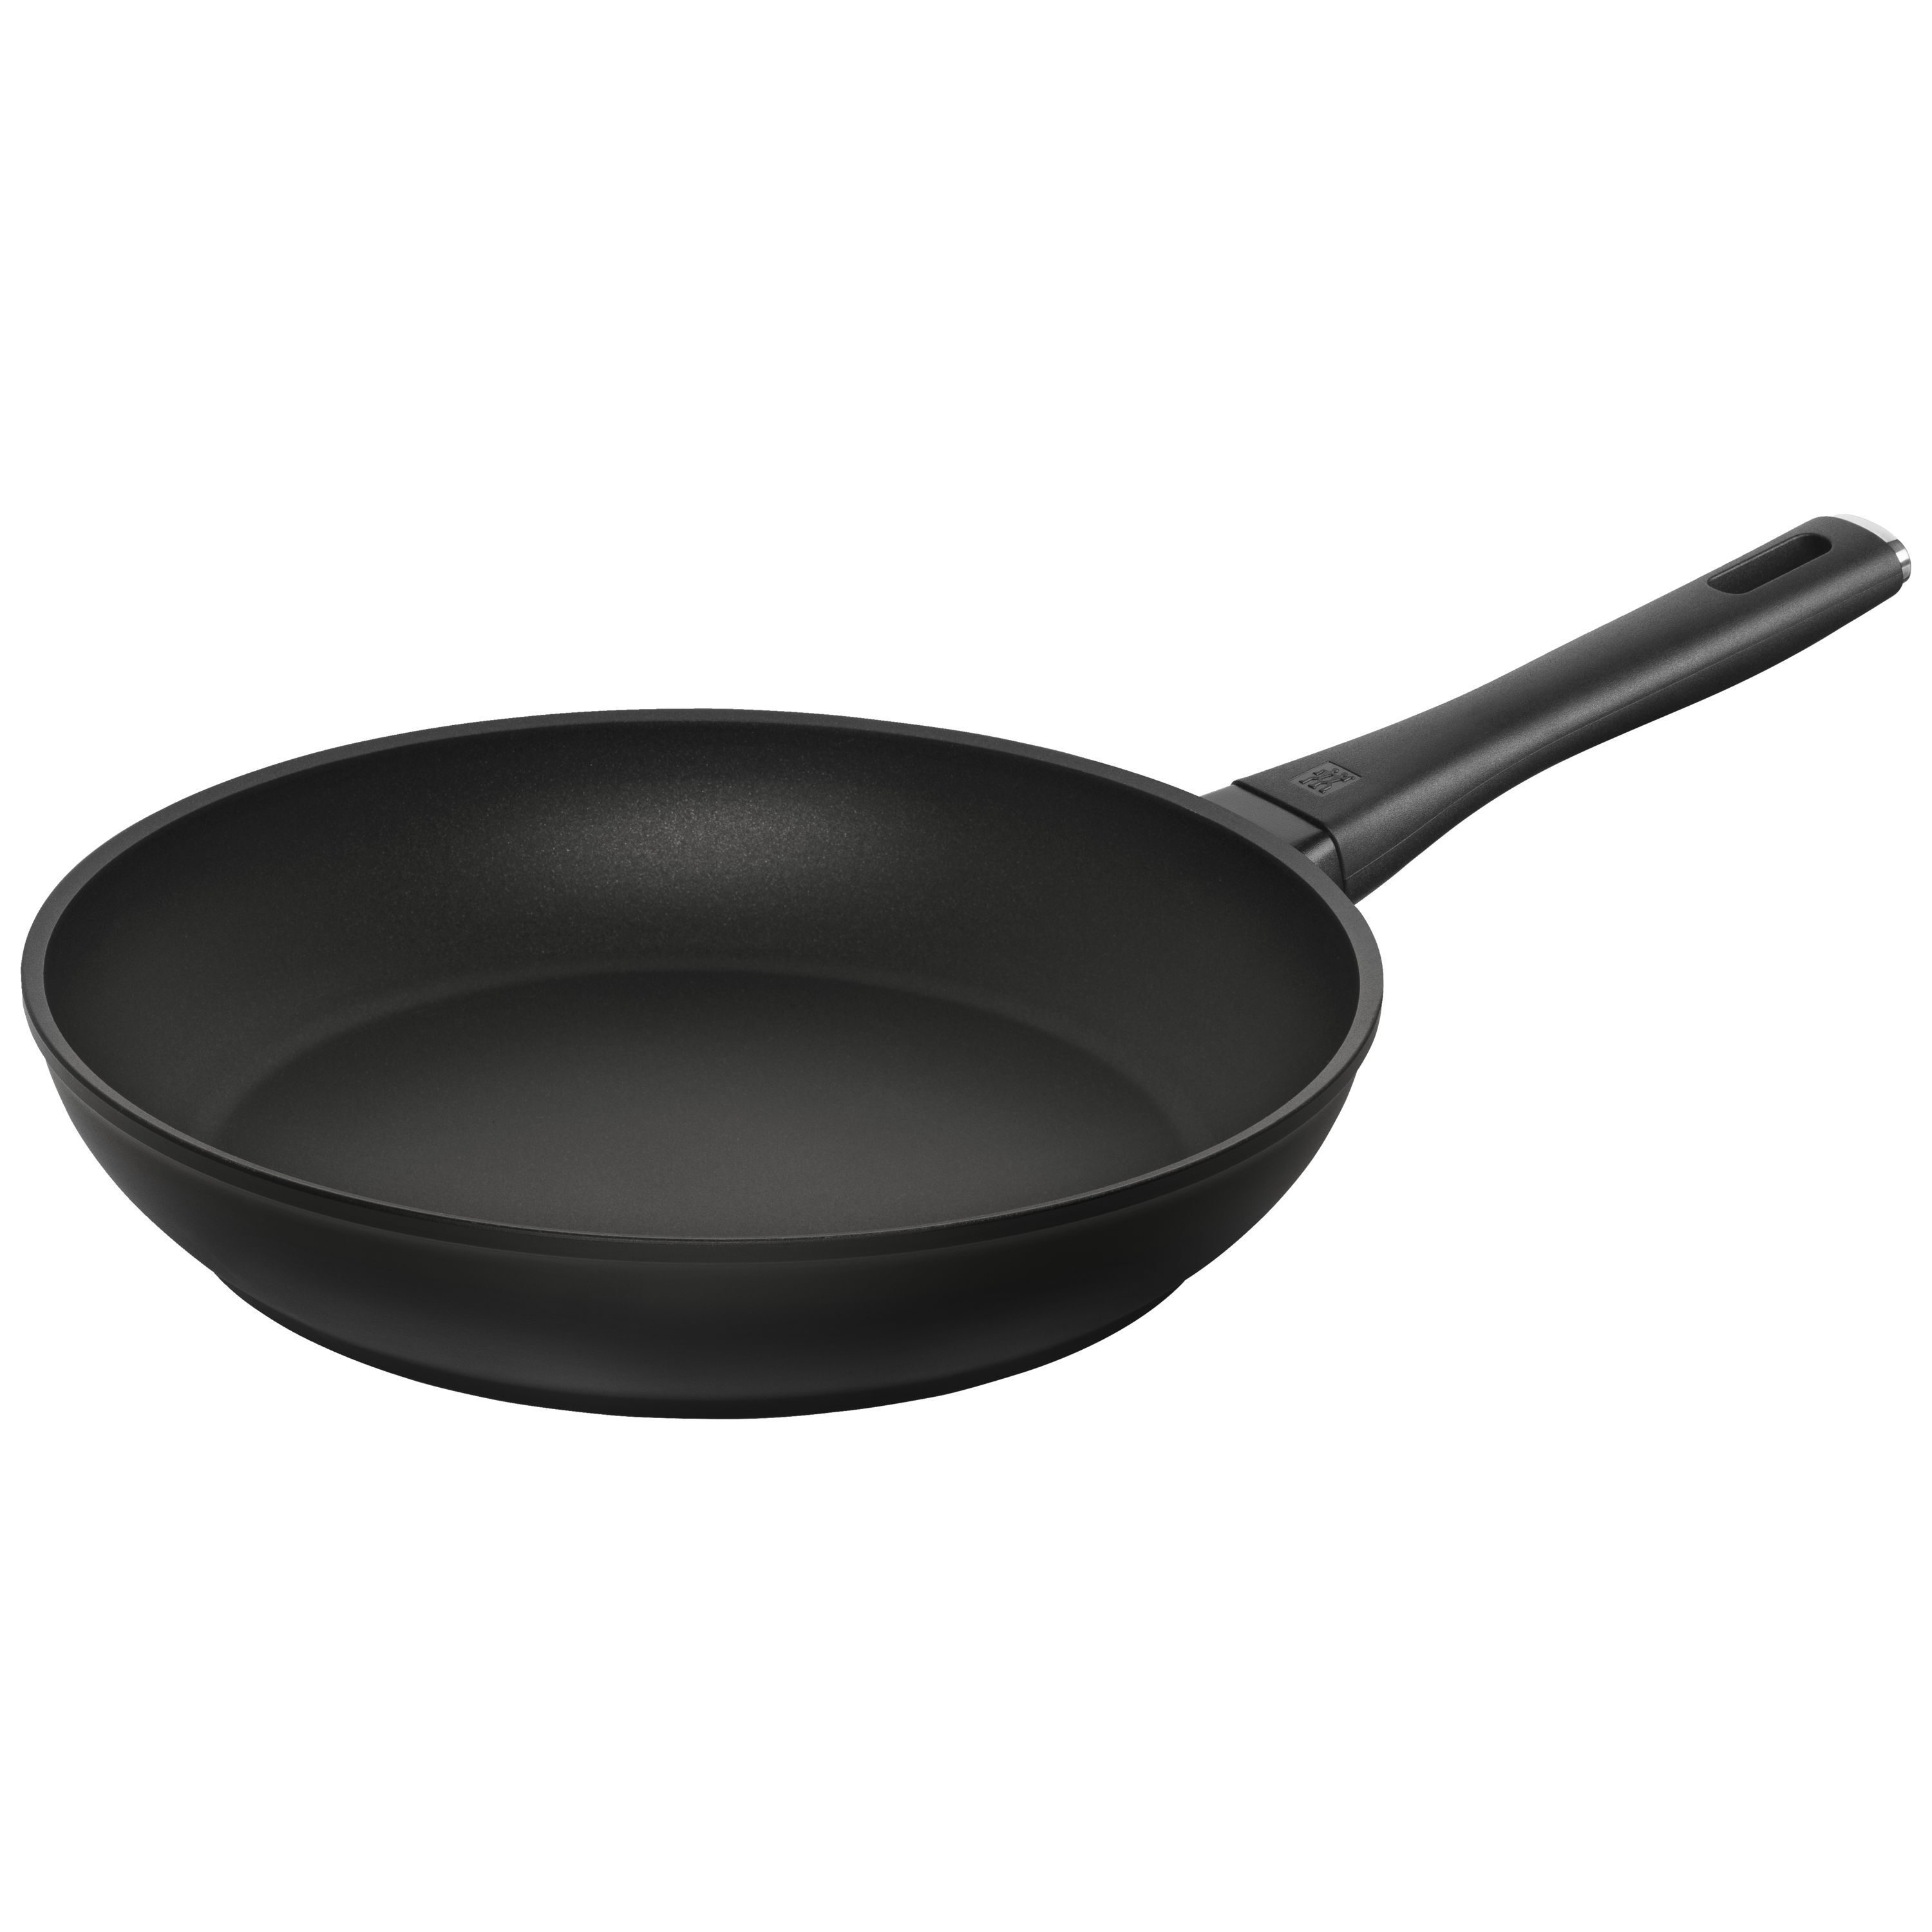 Zwilling Madura Plus 11 inches Non-Stick Frying Pan 